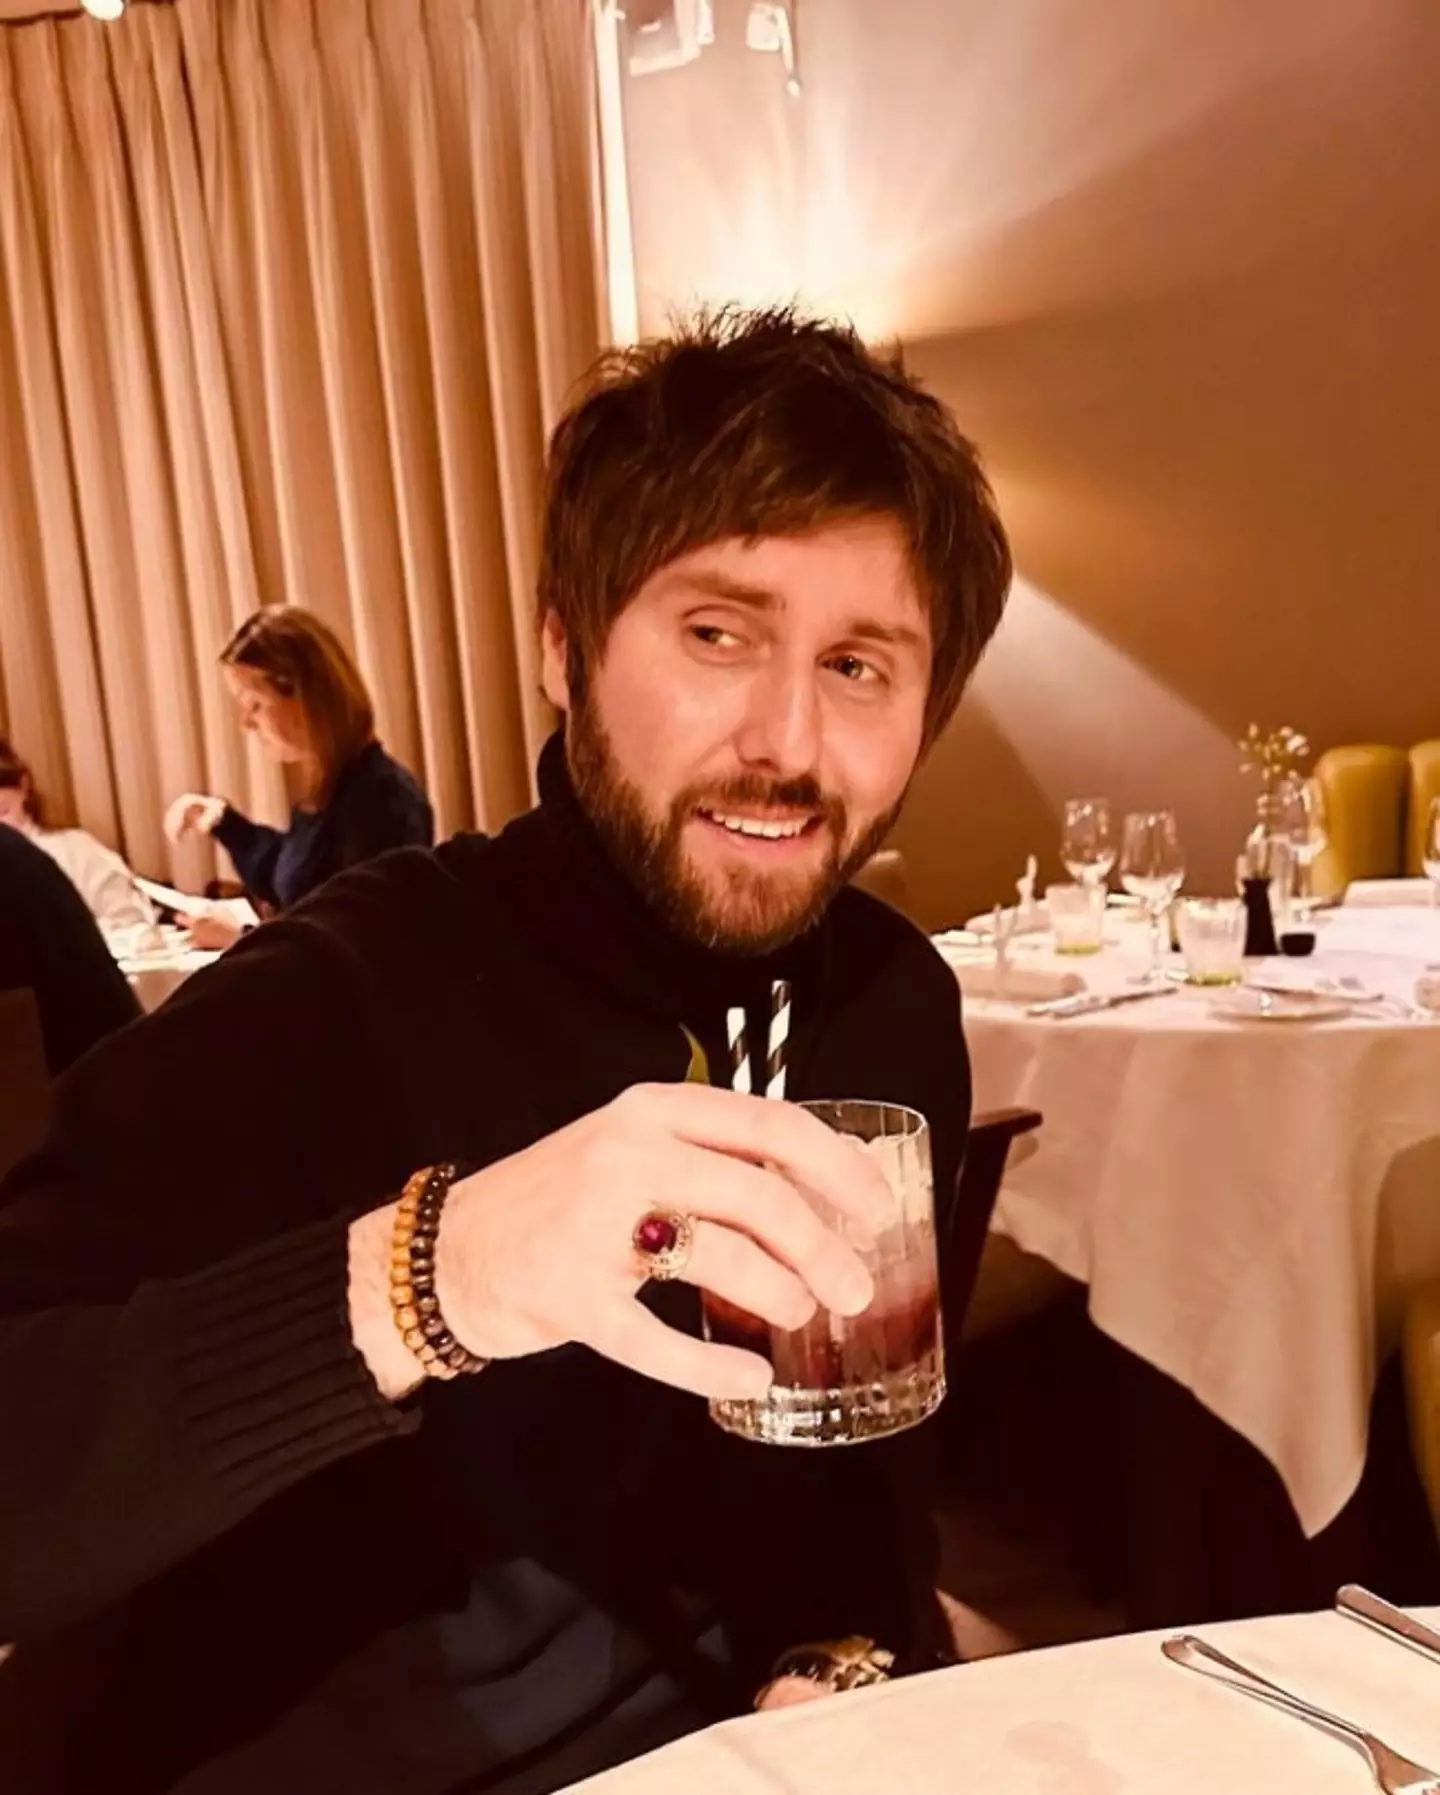 James Buckley has made a fortune just from Cameo videos.